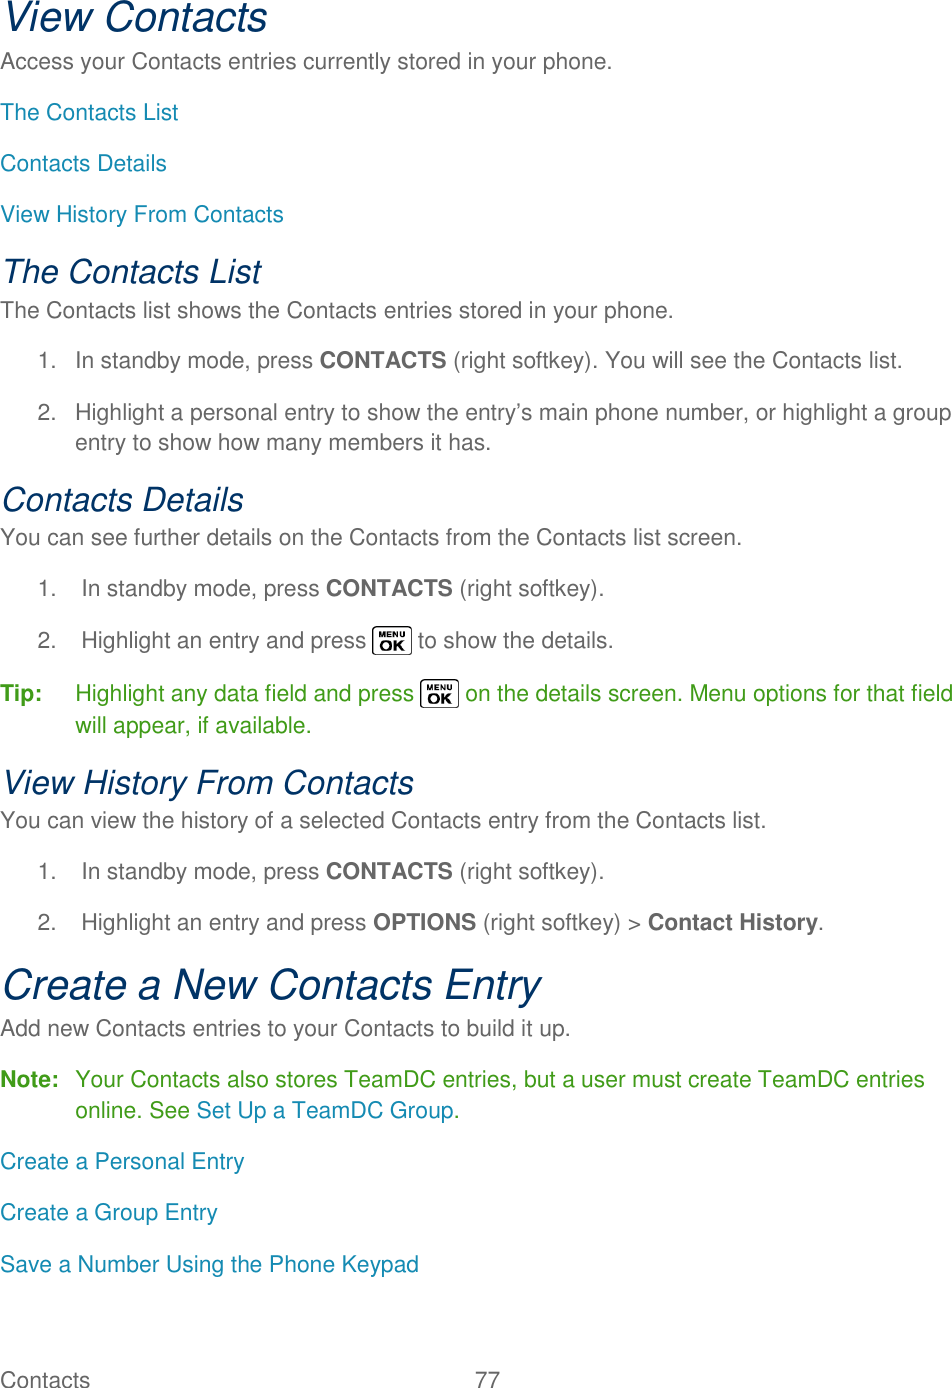  Contacts   77   View Contacts Access your Contacts entries currently stored in your phone. The Contacts List Contacts Details View History From Contacts The Contacts List The Contacts list shows the Contacts entries stored in your phone. 1.  In standby mode, press CONTACTS (right softkey). You will see the Contacts list. 2.  Highlight a personal entry to show the entry‘s main phone number, or highlight a group entry to show how many members it has. Contacts Details You can see further details on the Contacts from the Contacts list screen. 1.  In standby mode, press CONTACTS (right softkey).  2.  Highlight an entry and press   to show the details. Tip:  Highlight any data field and press   on the details screen. Menu options for that field will appear, if available. View History From Contacts You can view the history of a selected Contacts entry from the Contacts list. 1.  In standby mode, press CONTACTS (right softkey). 2.  Highlight an entry and press OPTIONS (right softkey) &gt; Contact History. Create a New Contacts Entry Add new Contacts entries to your Contacts to build it up. Note:  Your Contacts also stores TeamDC entries, but a user must create TeamDC entries online. See Set Up a TeamDC Group. Create a Personal Entry Create a Group Entry Save a Number Using the Phone Keypad 